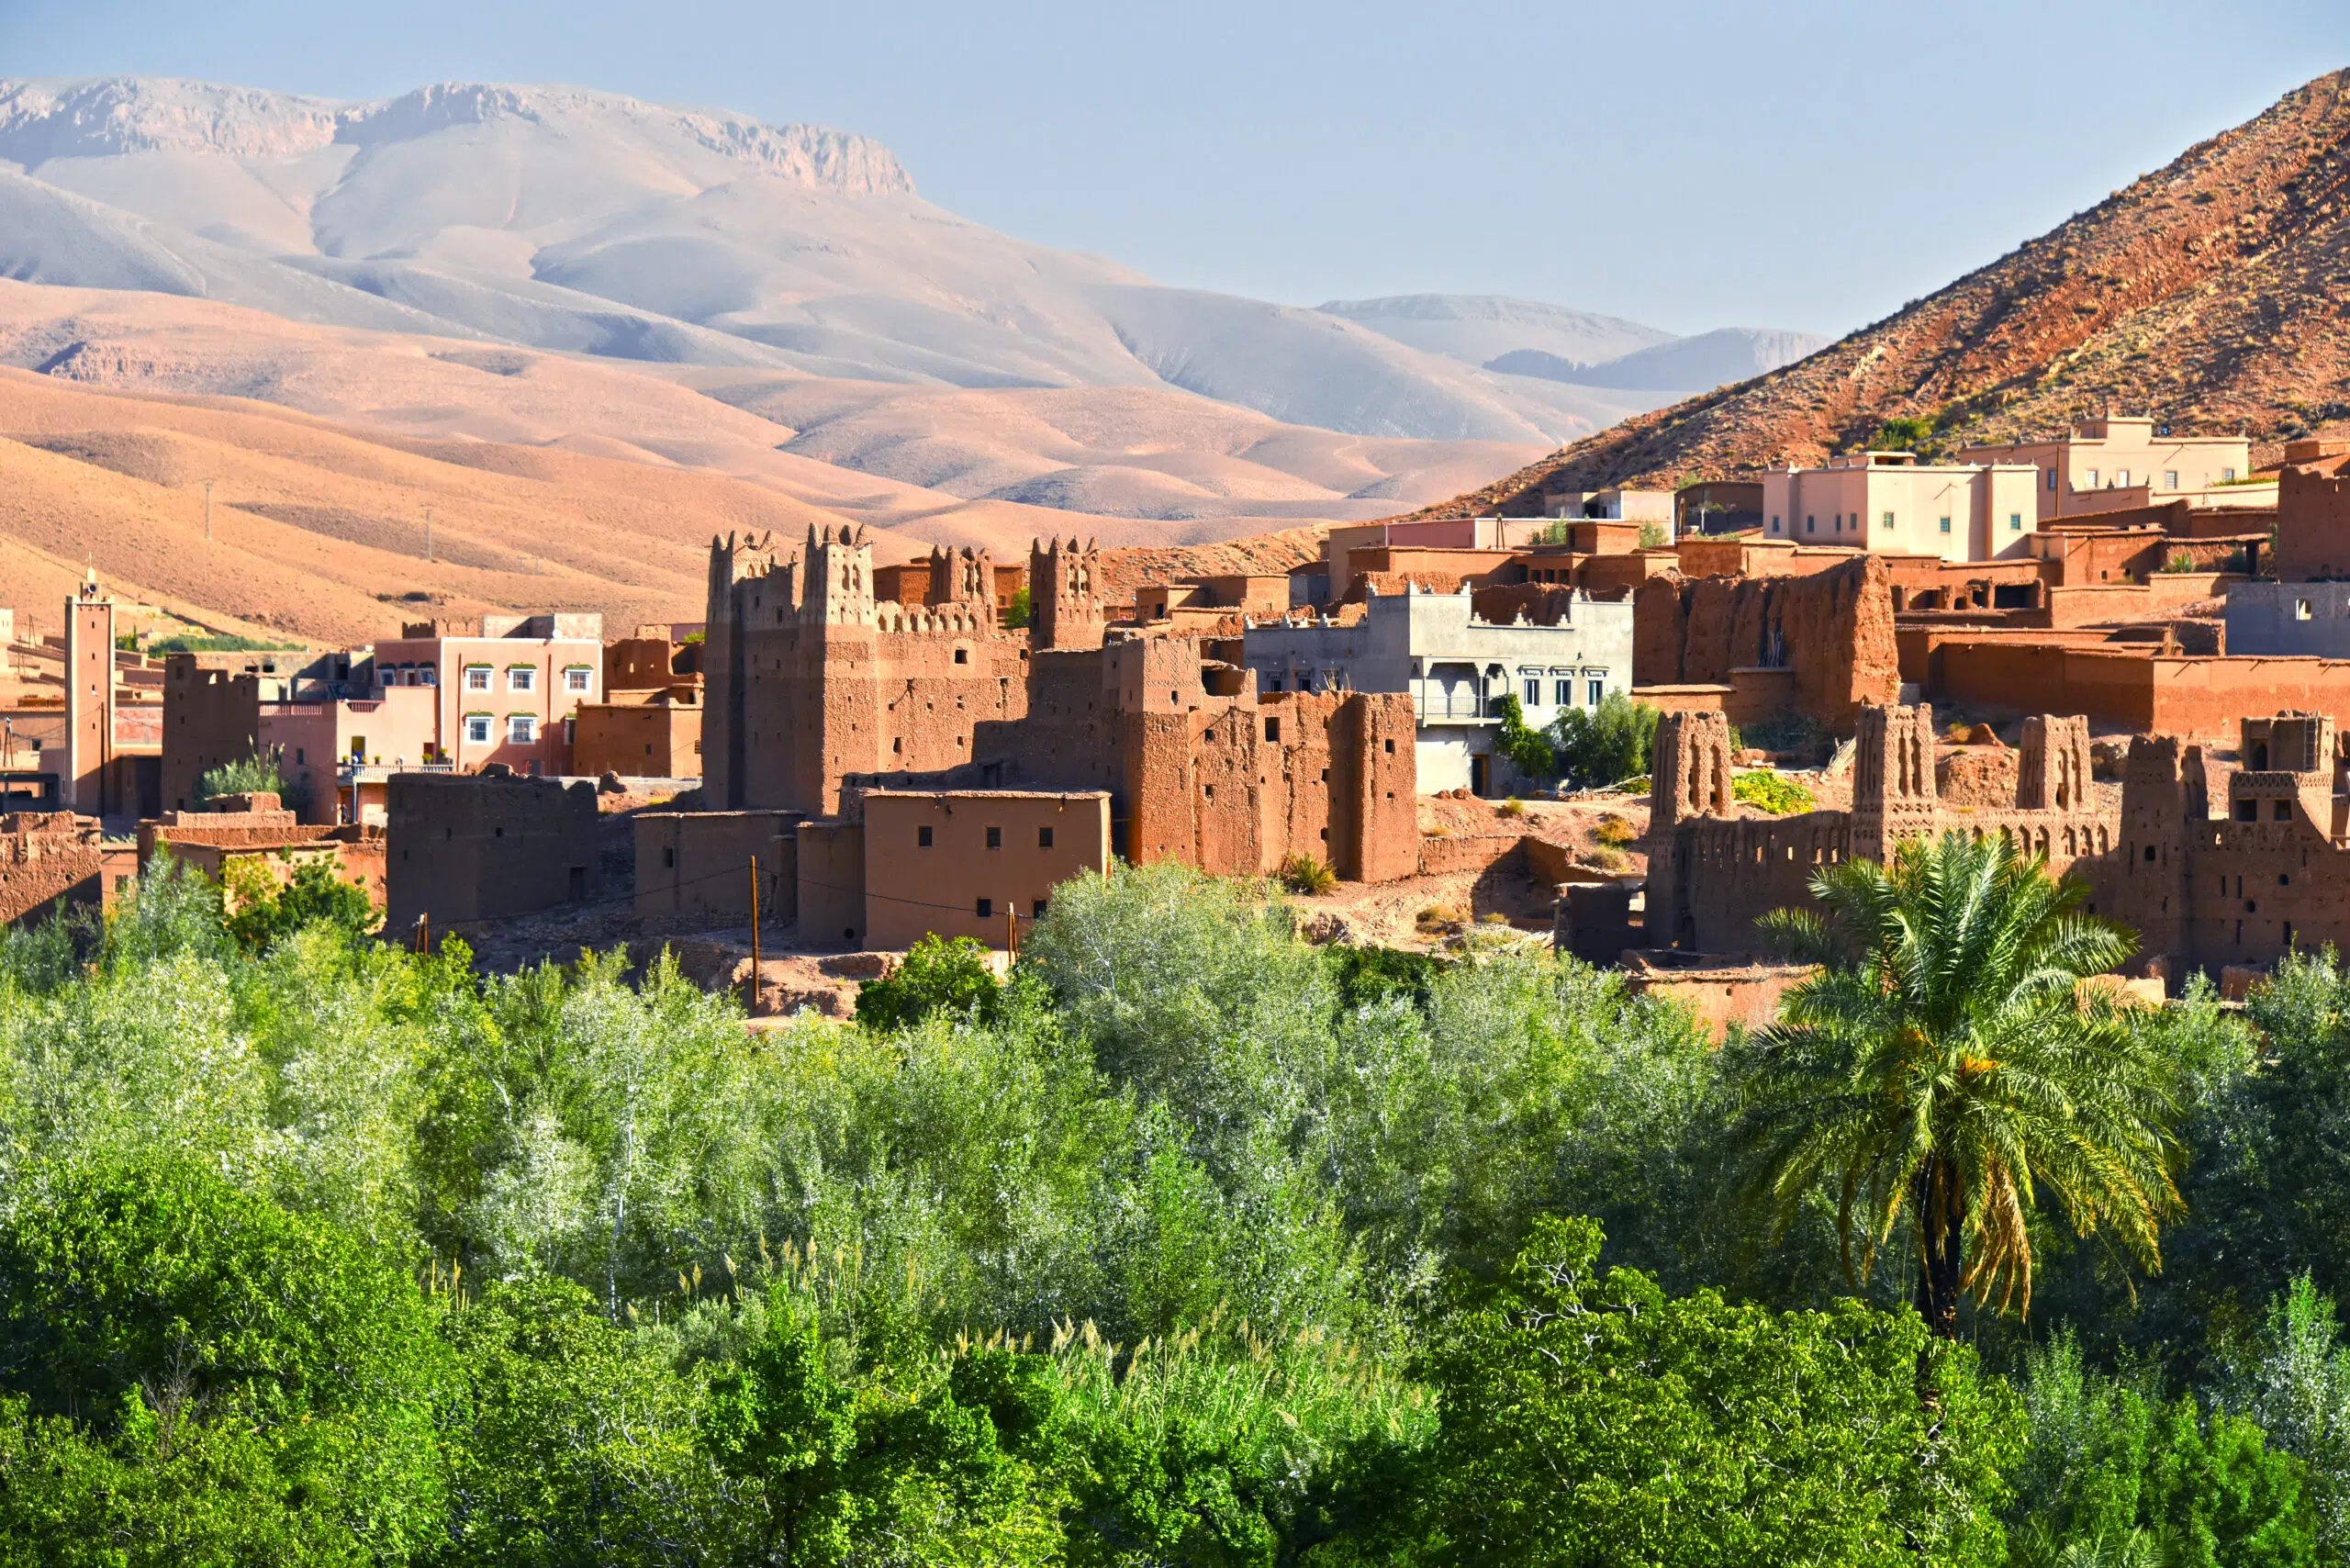 Old berber architecture near the city of Tamellalt in Atlas Mountains region in Morocco.